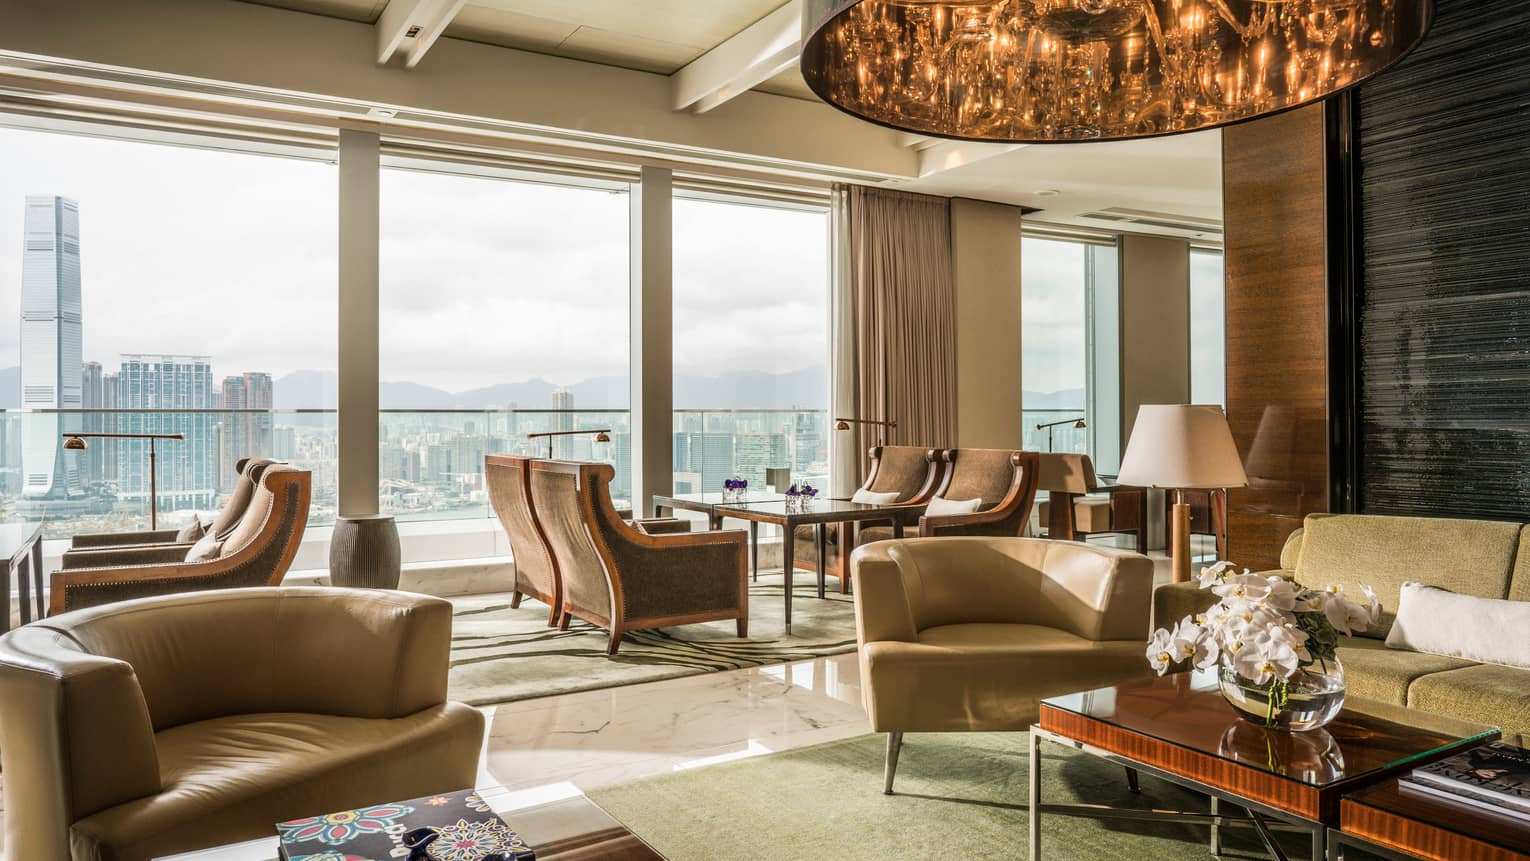 Executive Lounge seating areas with sofas, curved armchairs, bright floor-to-ceiling window, city views